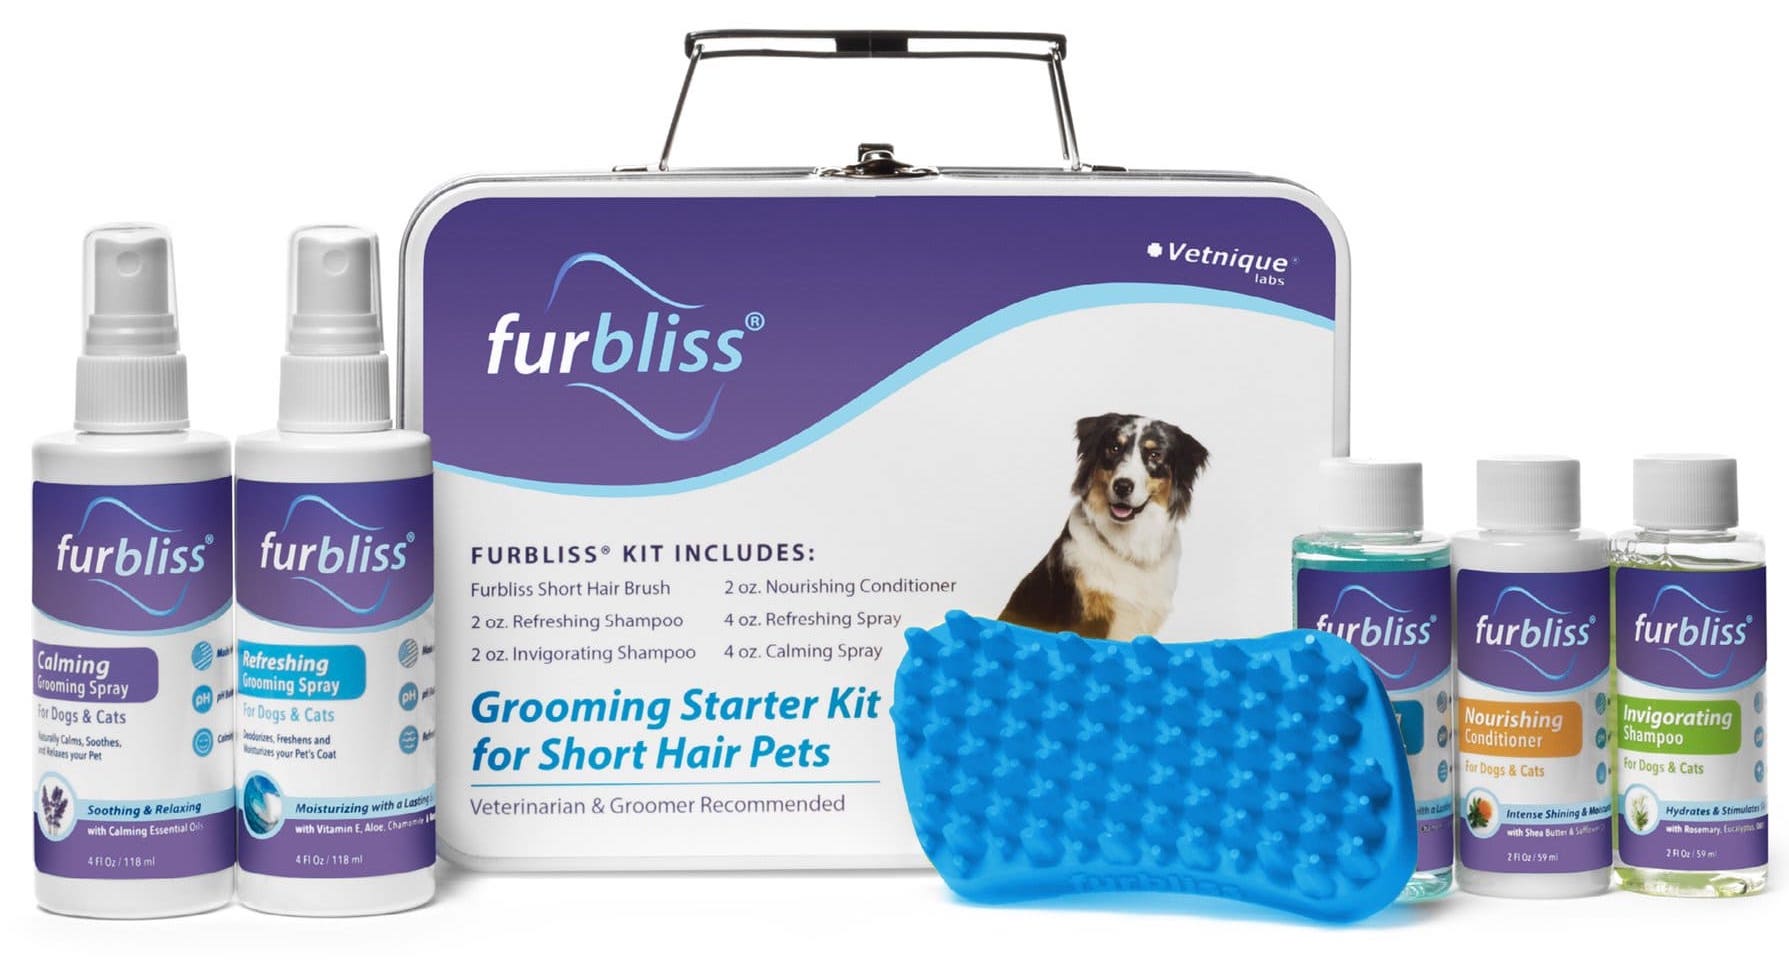 Furbliss Grooming & Bathing Kit for pets with short hair 1 count 1